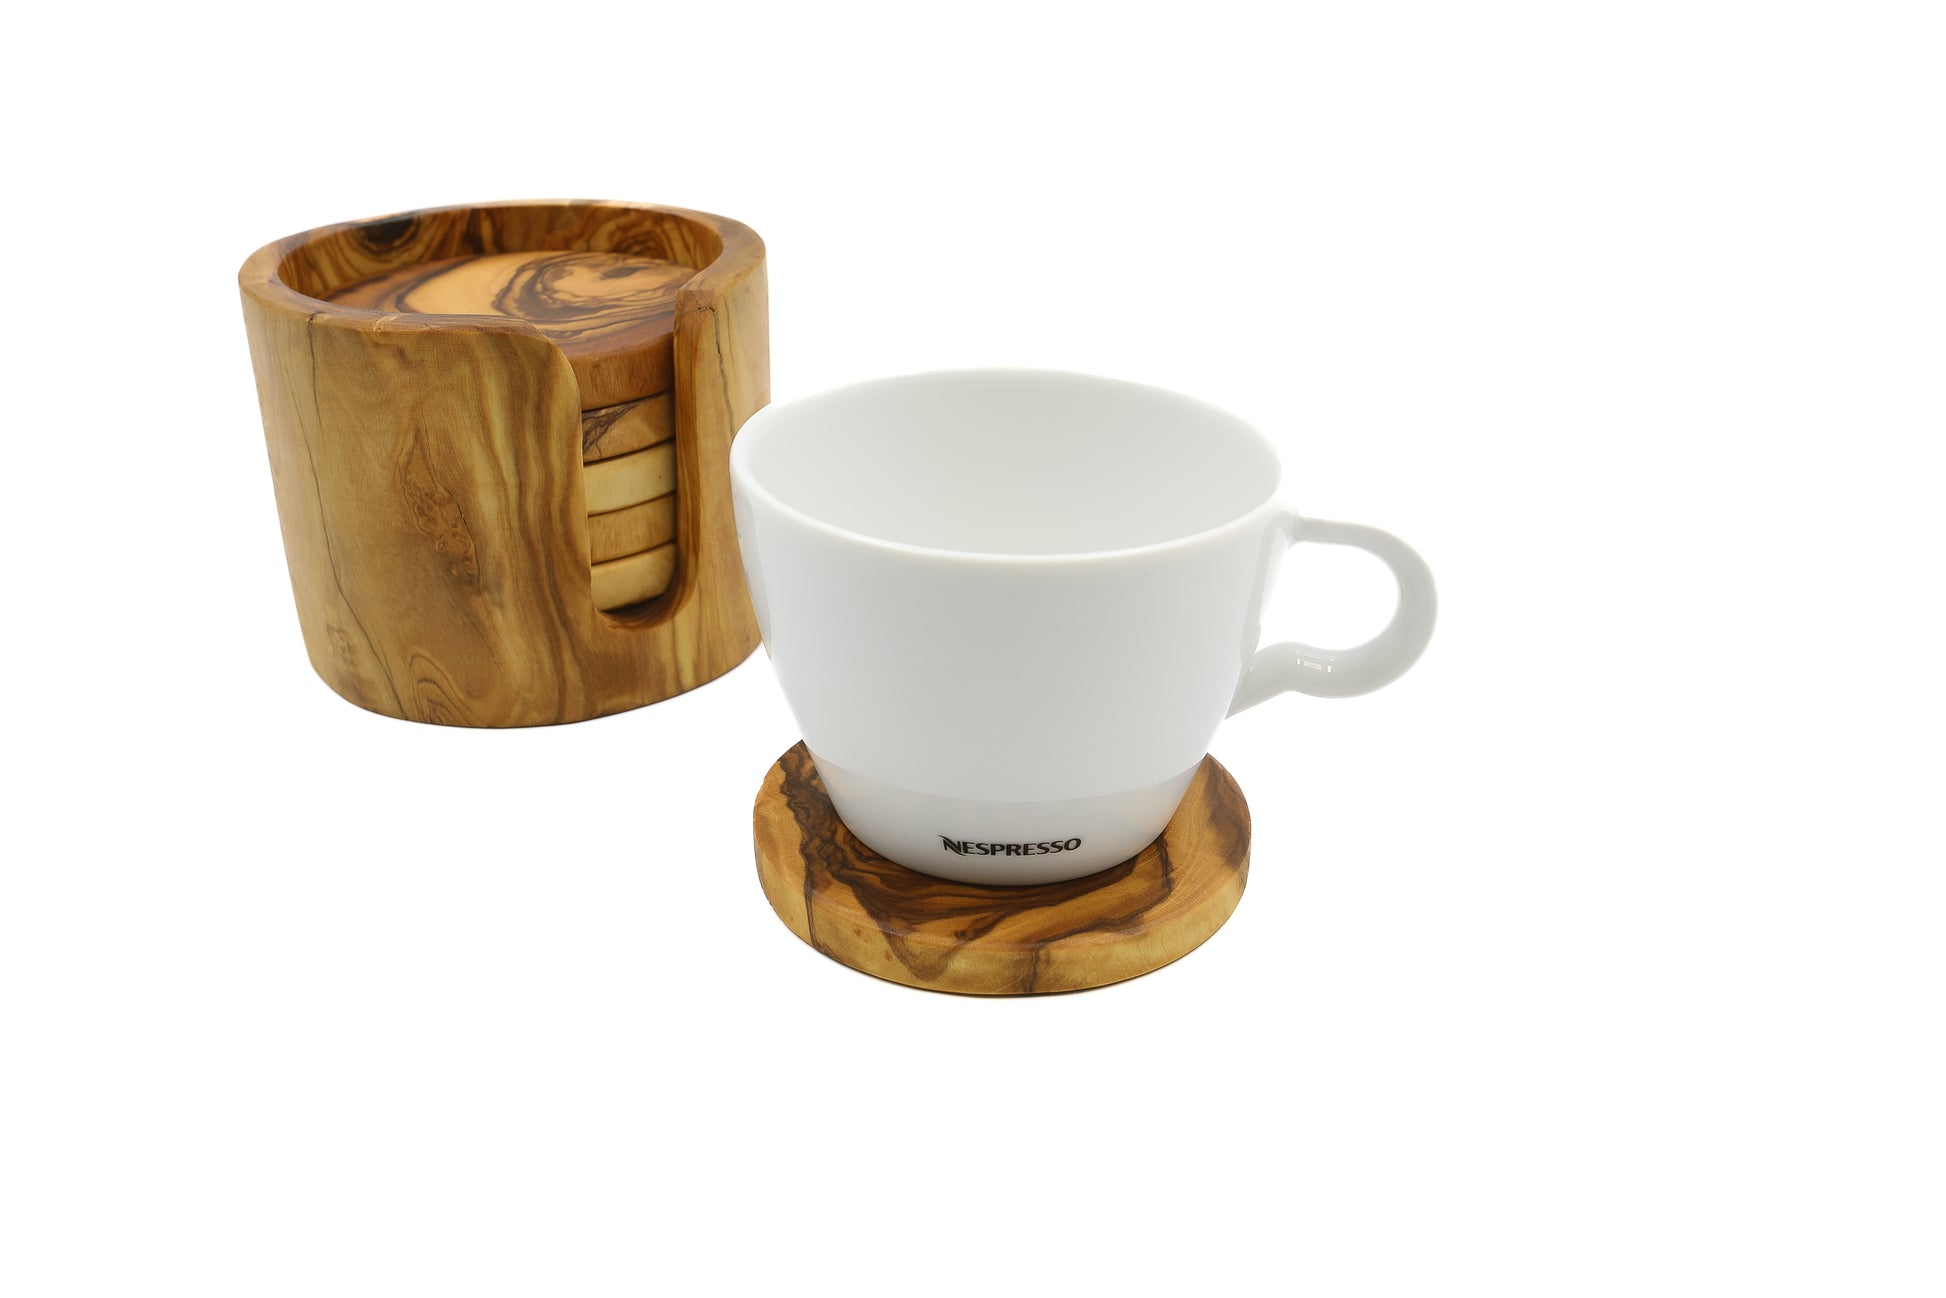 Artisan-made wooden coaster and trivet in beautiful olive wood